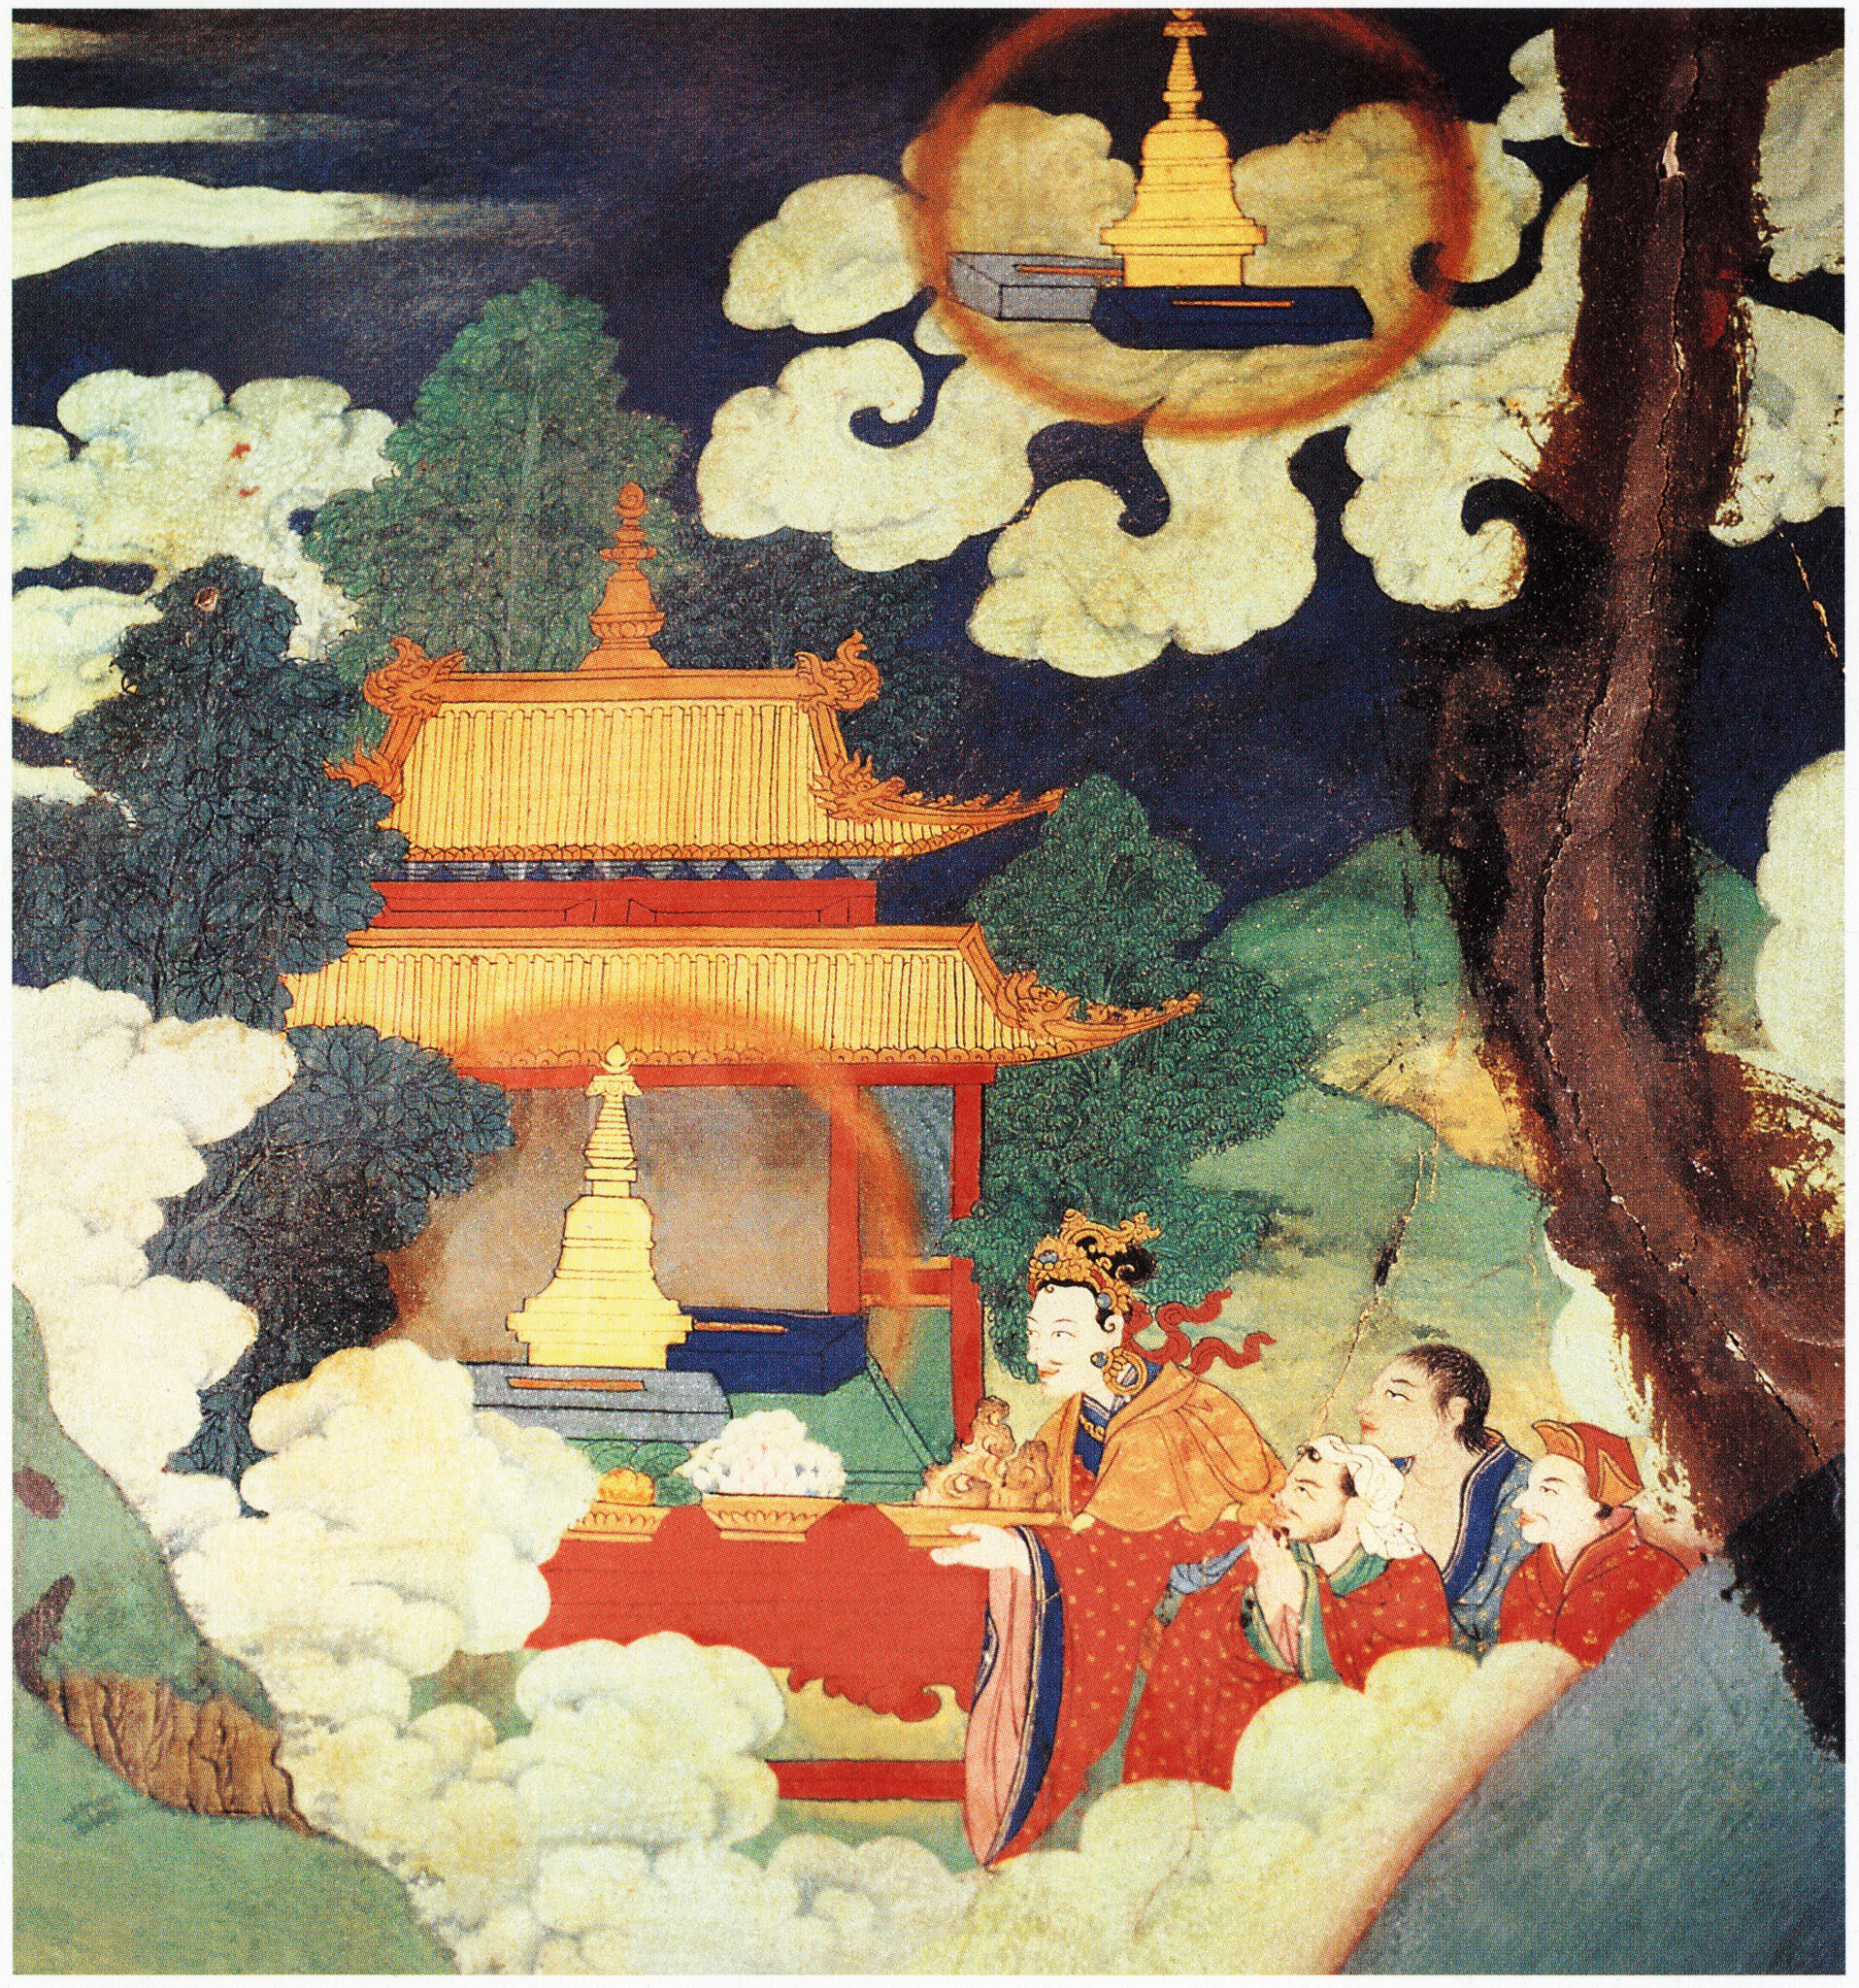 Worshippers place offerings before golden stupa and temple; second stupa floats on clouds above them